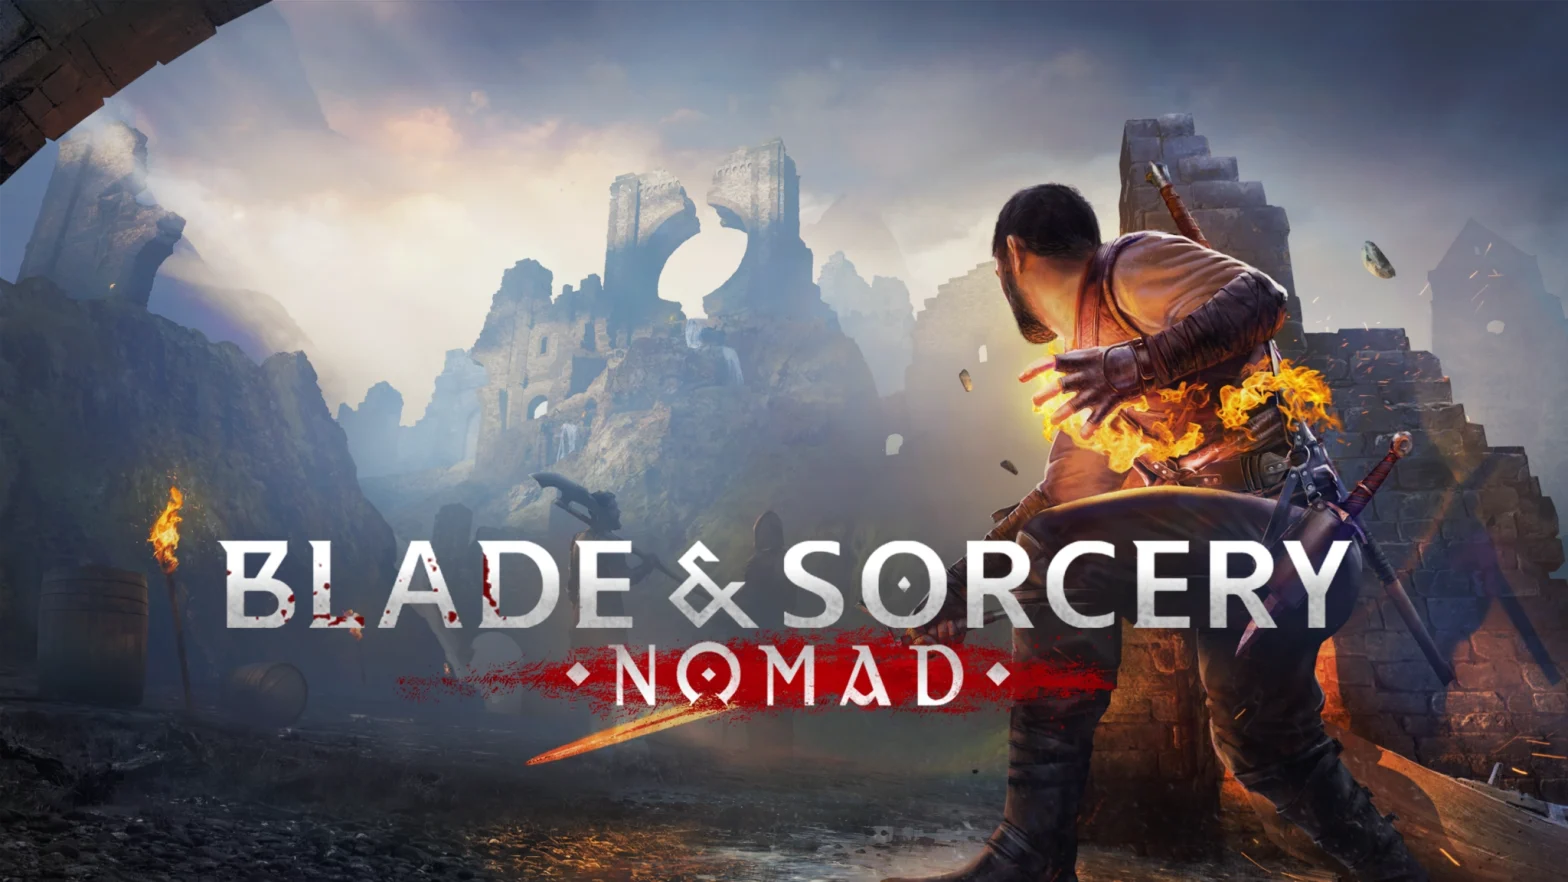 Blade and Sorcery: Nomad